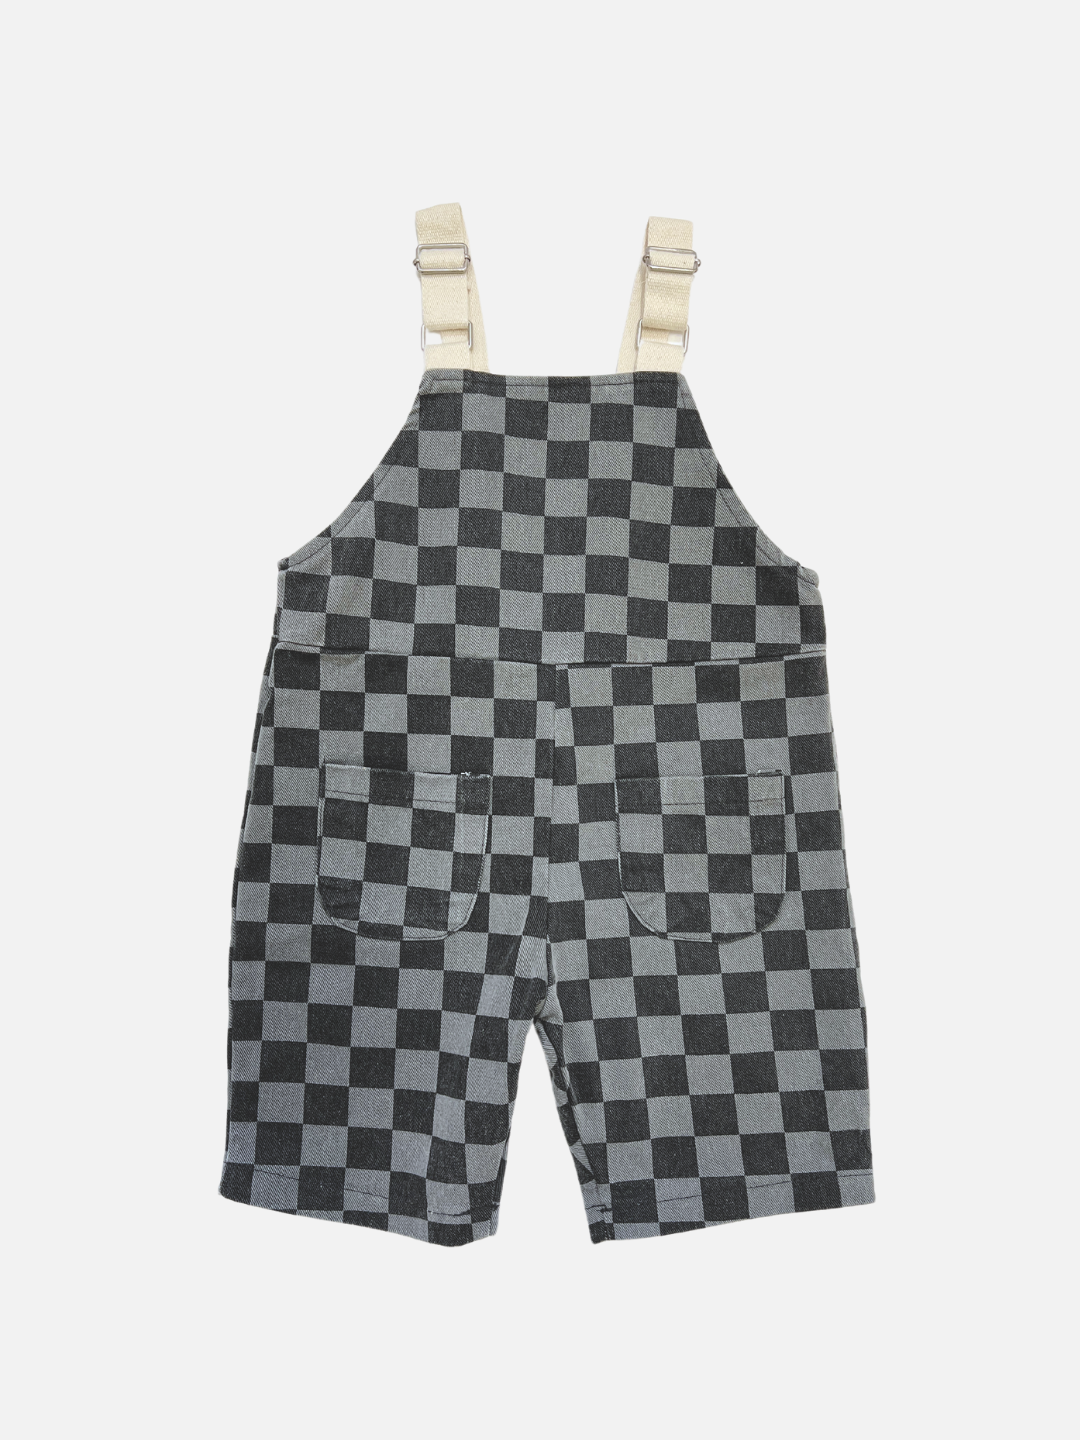 A front view of the kid's pull-on checker overalls in charcoal